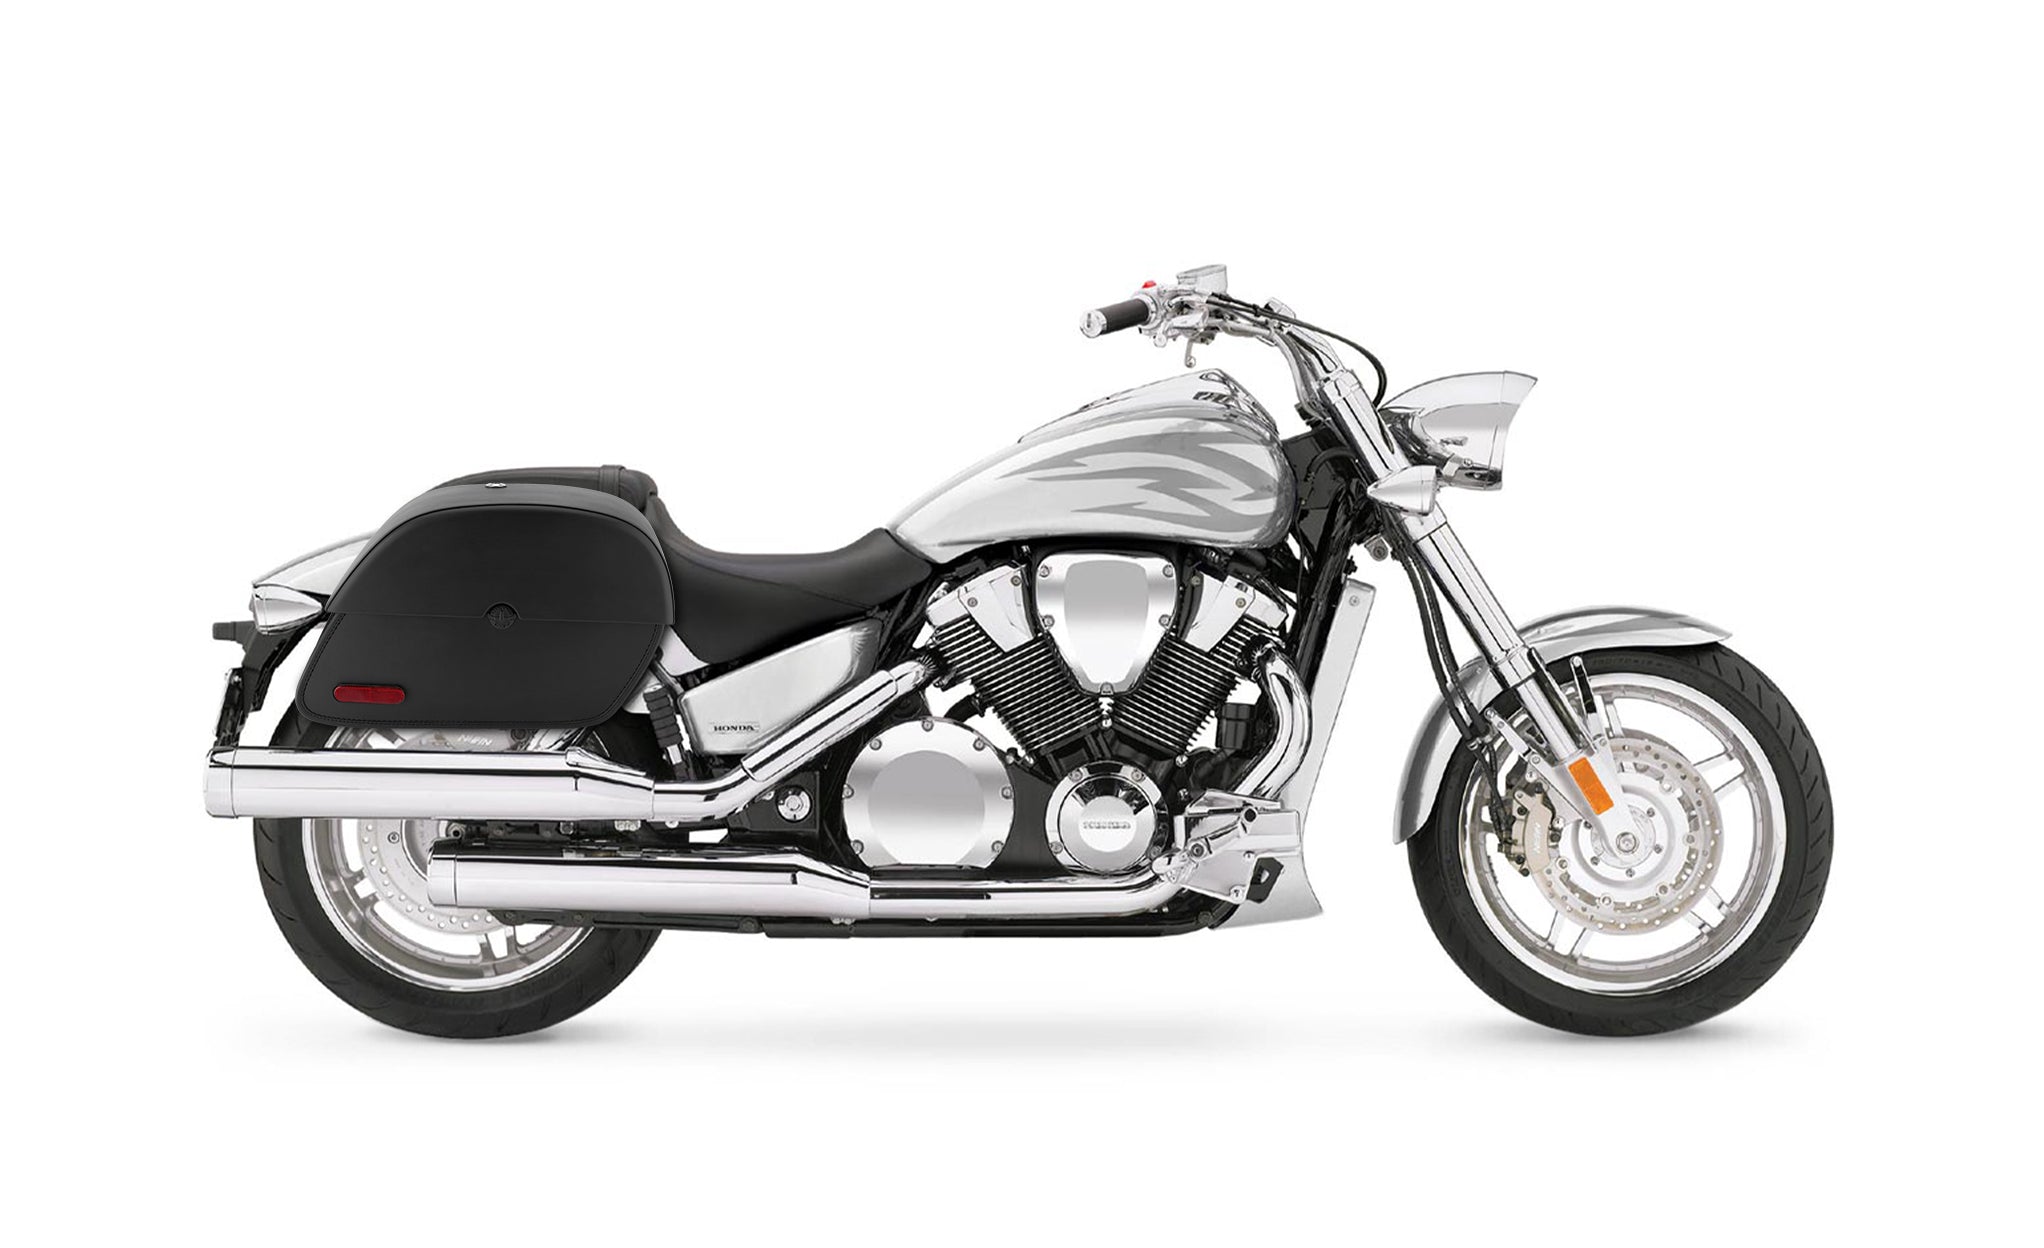 Viking Panzer Medium Honda Vtx 1800 F Leather Motorcycle Saddlebags Engineering Excellence with Bag on Bike @expand